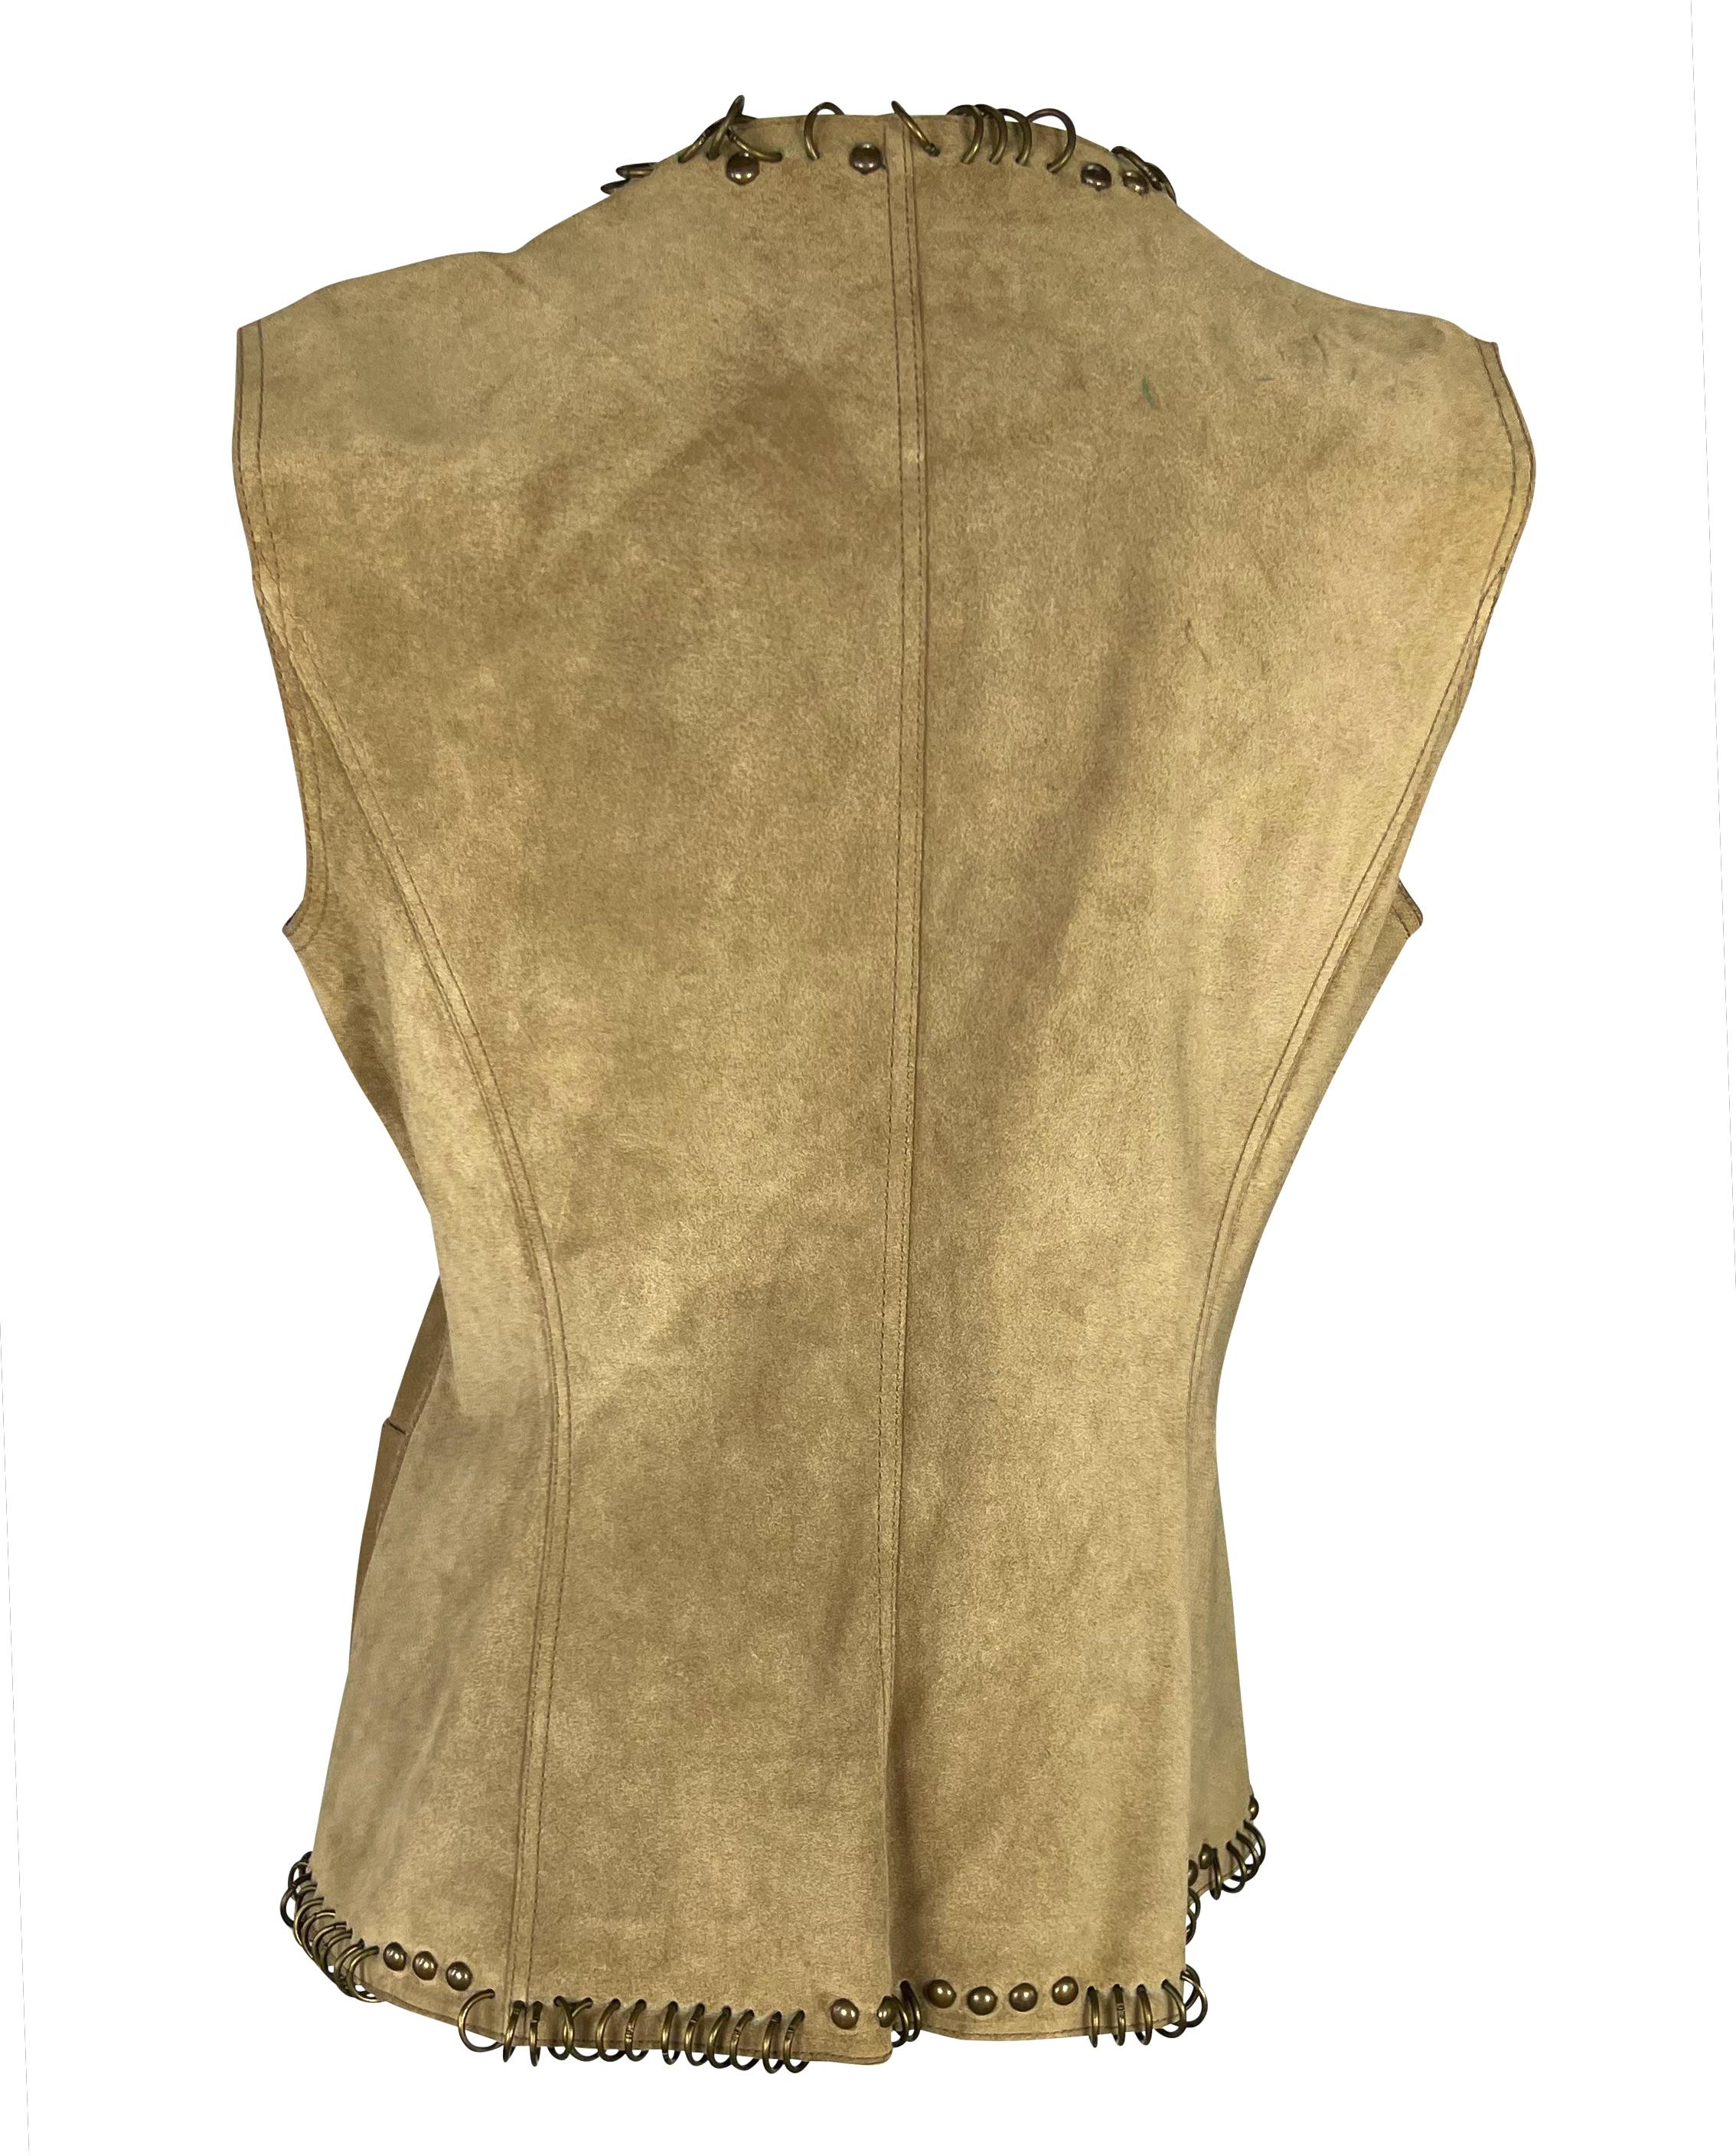 S/S 2002 Yves Saint Laurent by Tom Ford Safari Distressed Suede Studded Vest For Sale 2